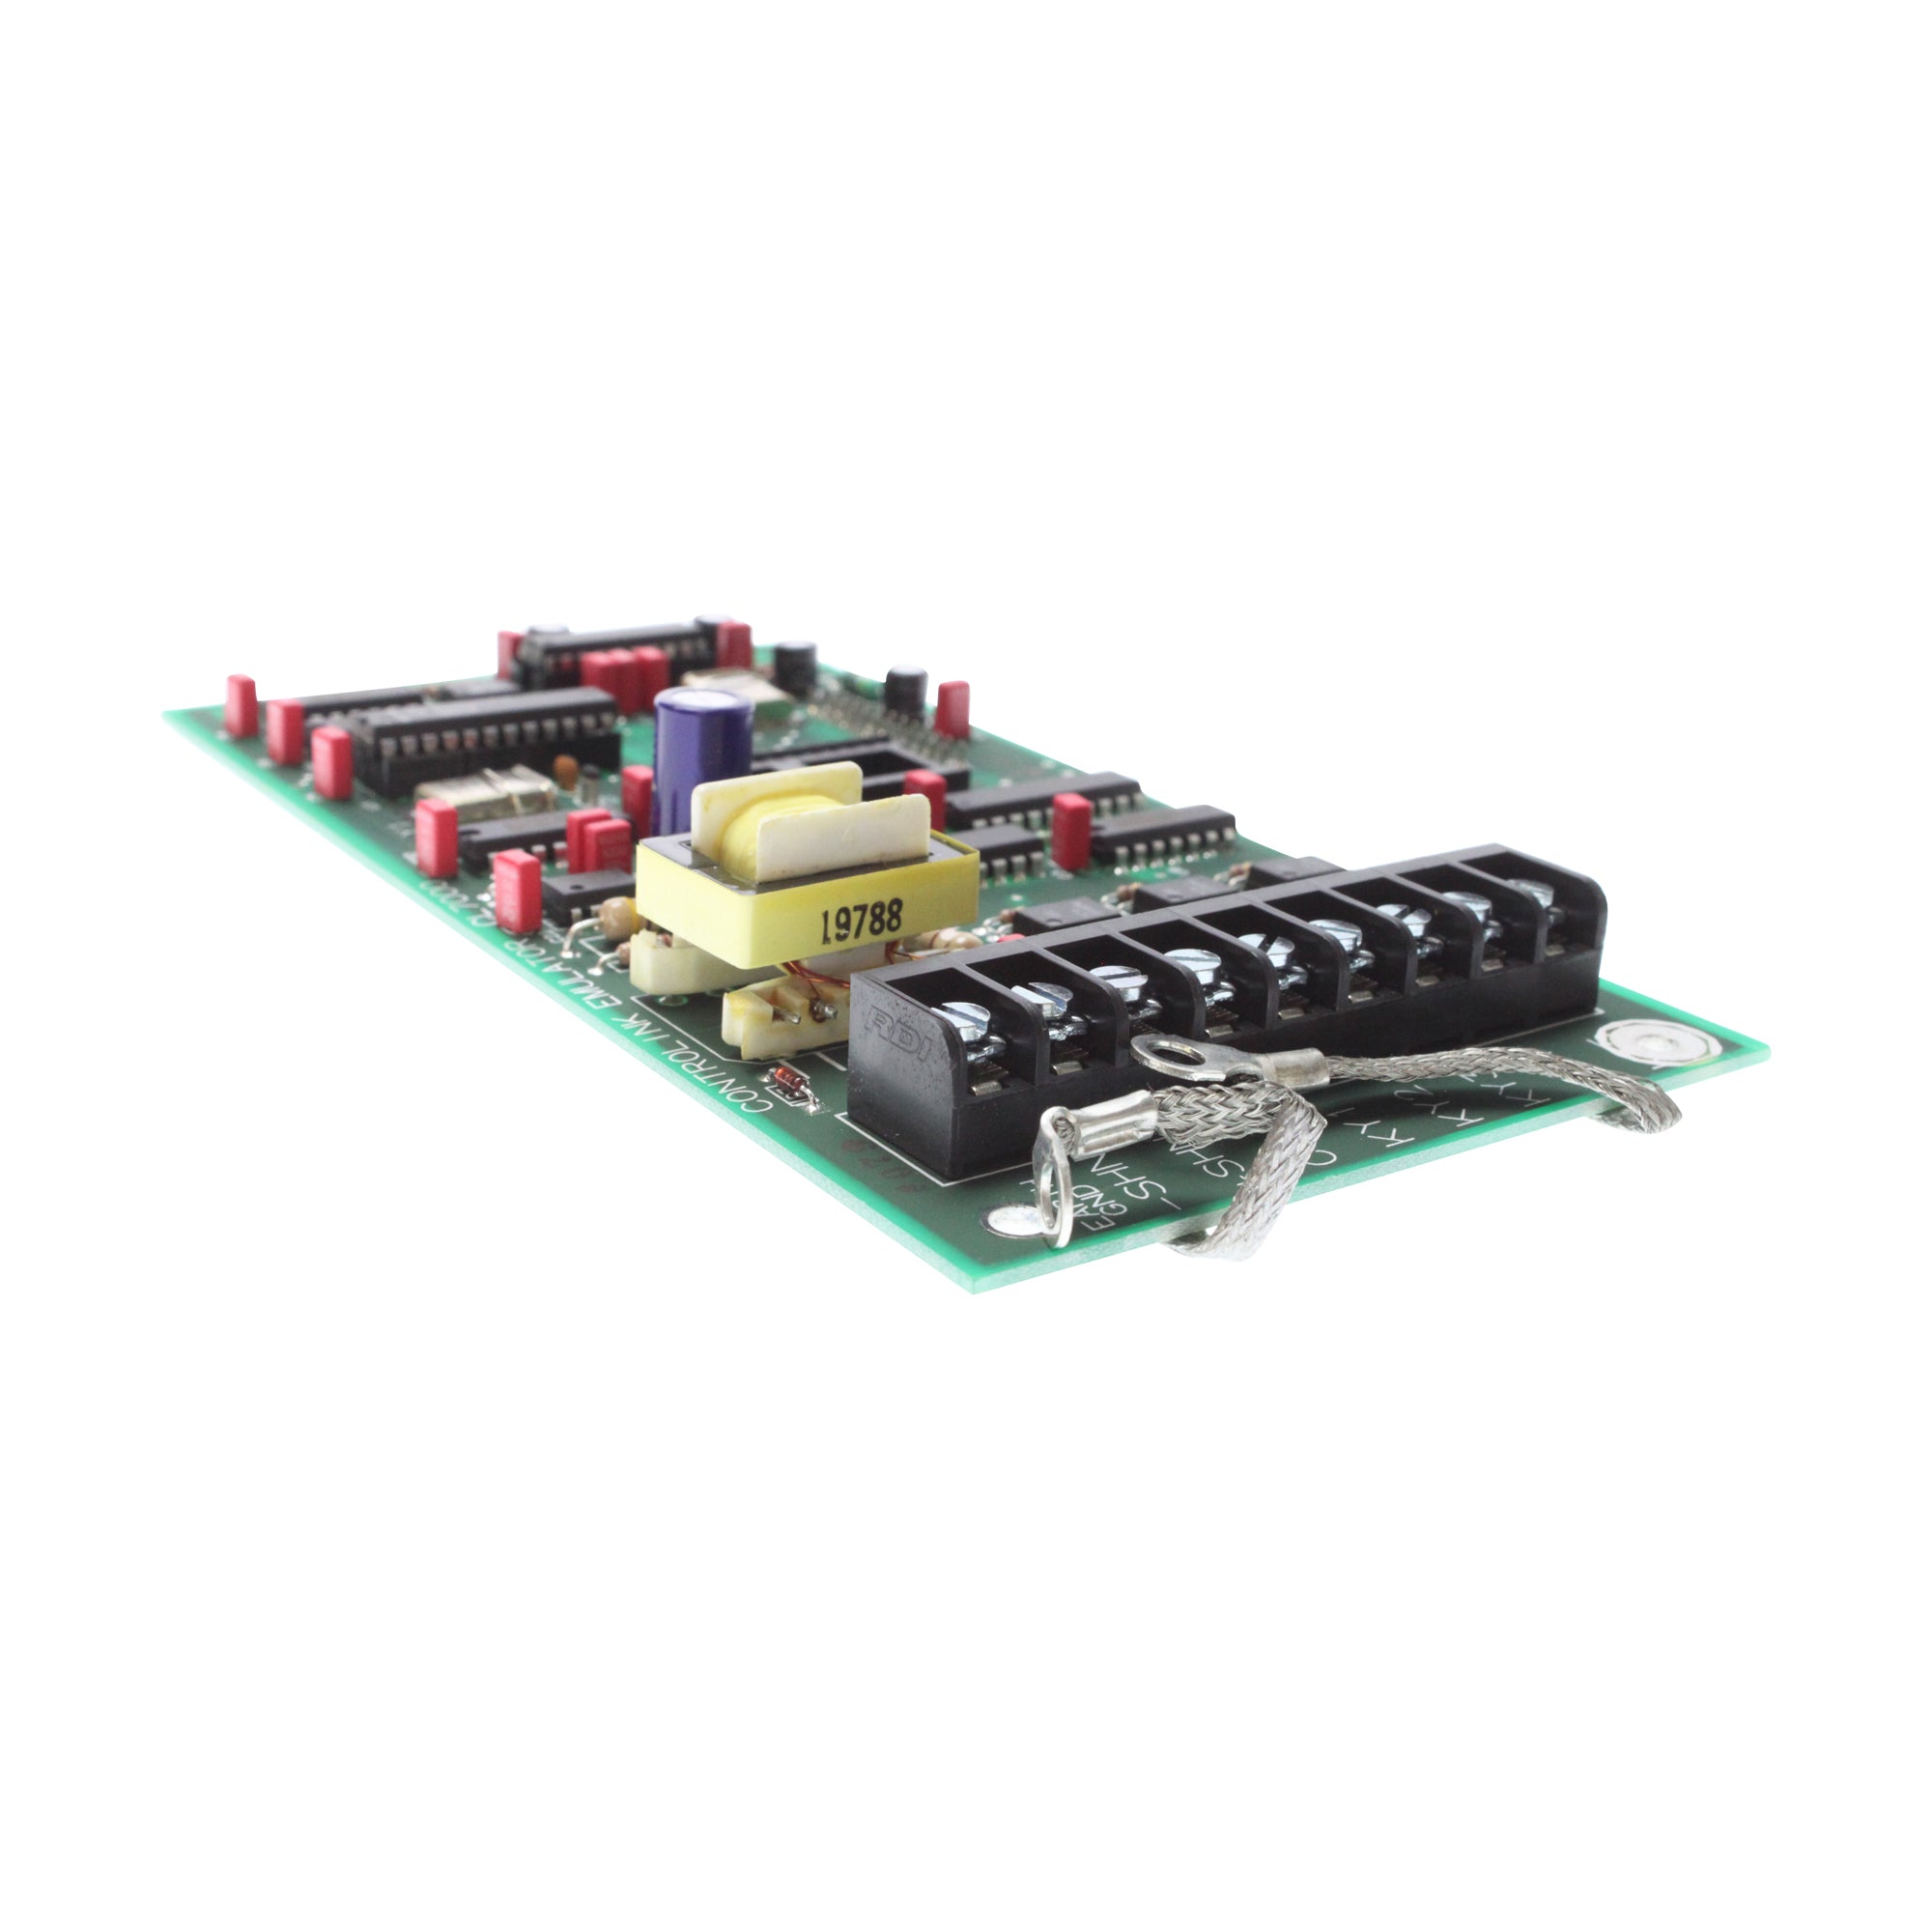 Detection Systems, DETECTION SYSTEMS CL7001 CONFIGURATION CONTROLLER BOARD